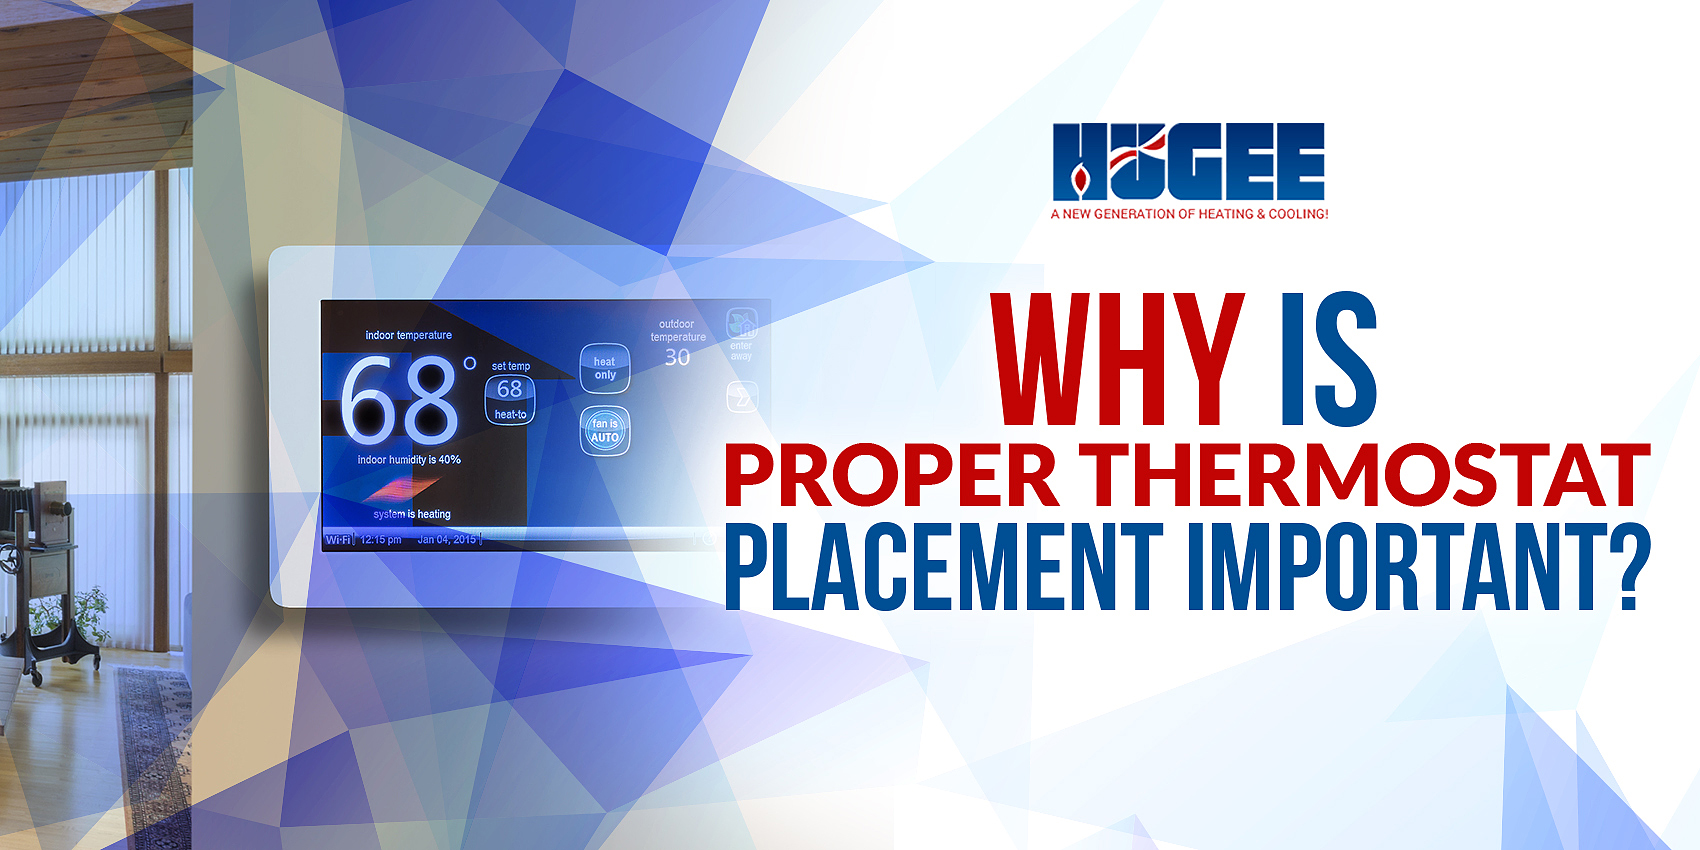 Why Is Proper Thermostat Placement Important?